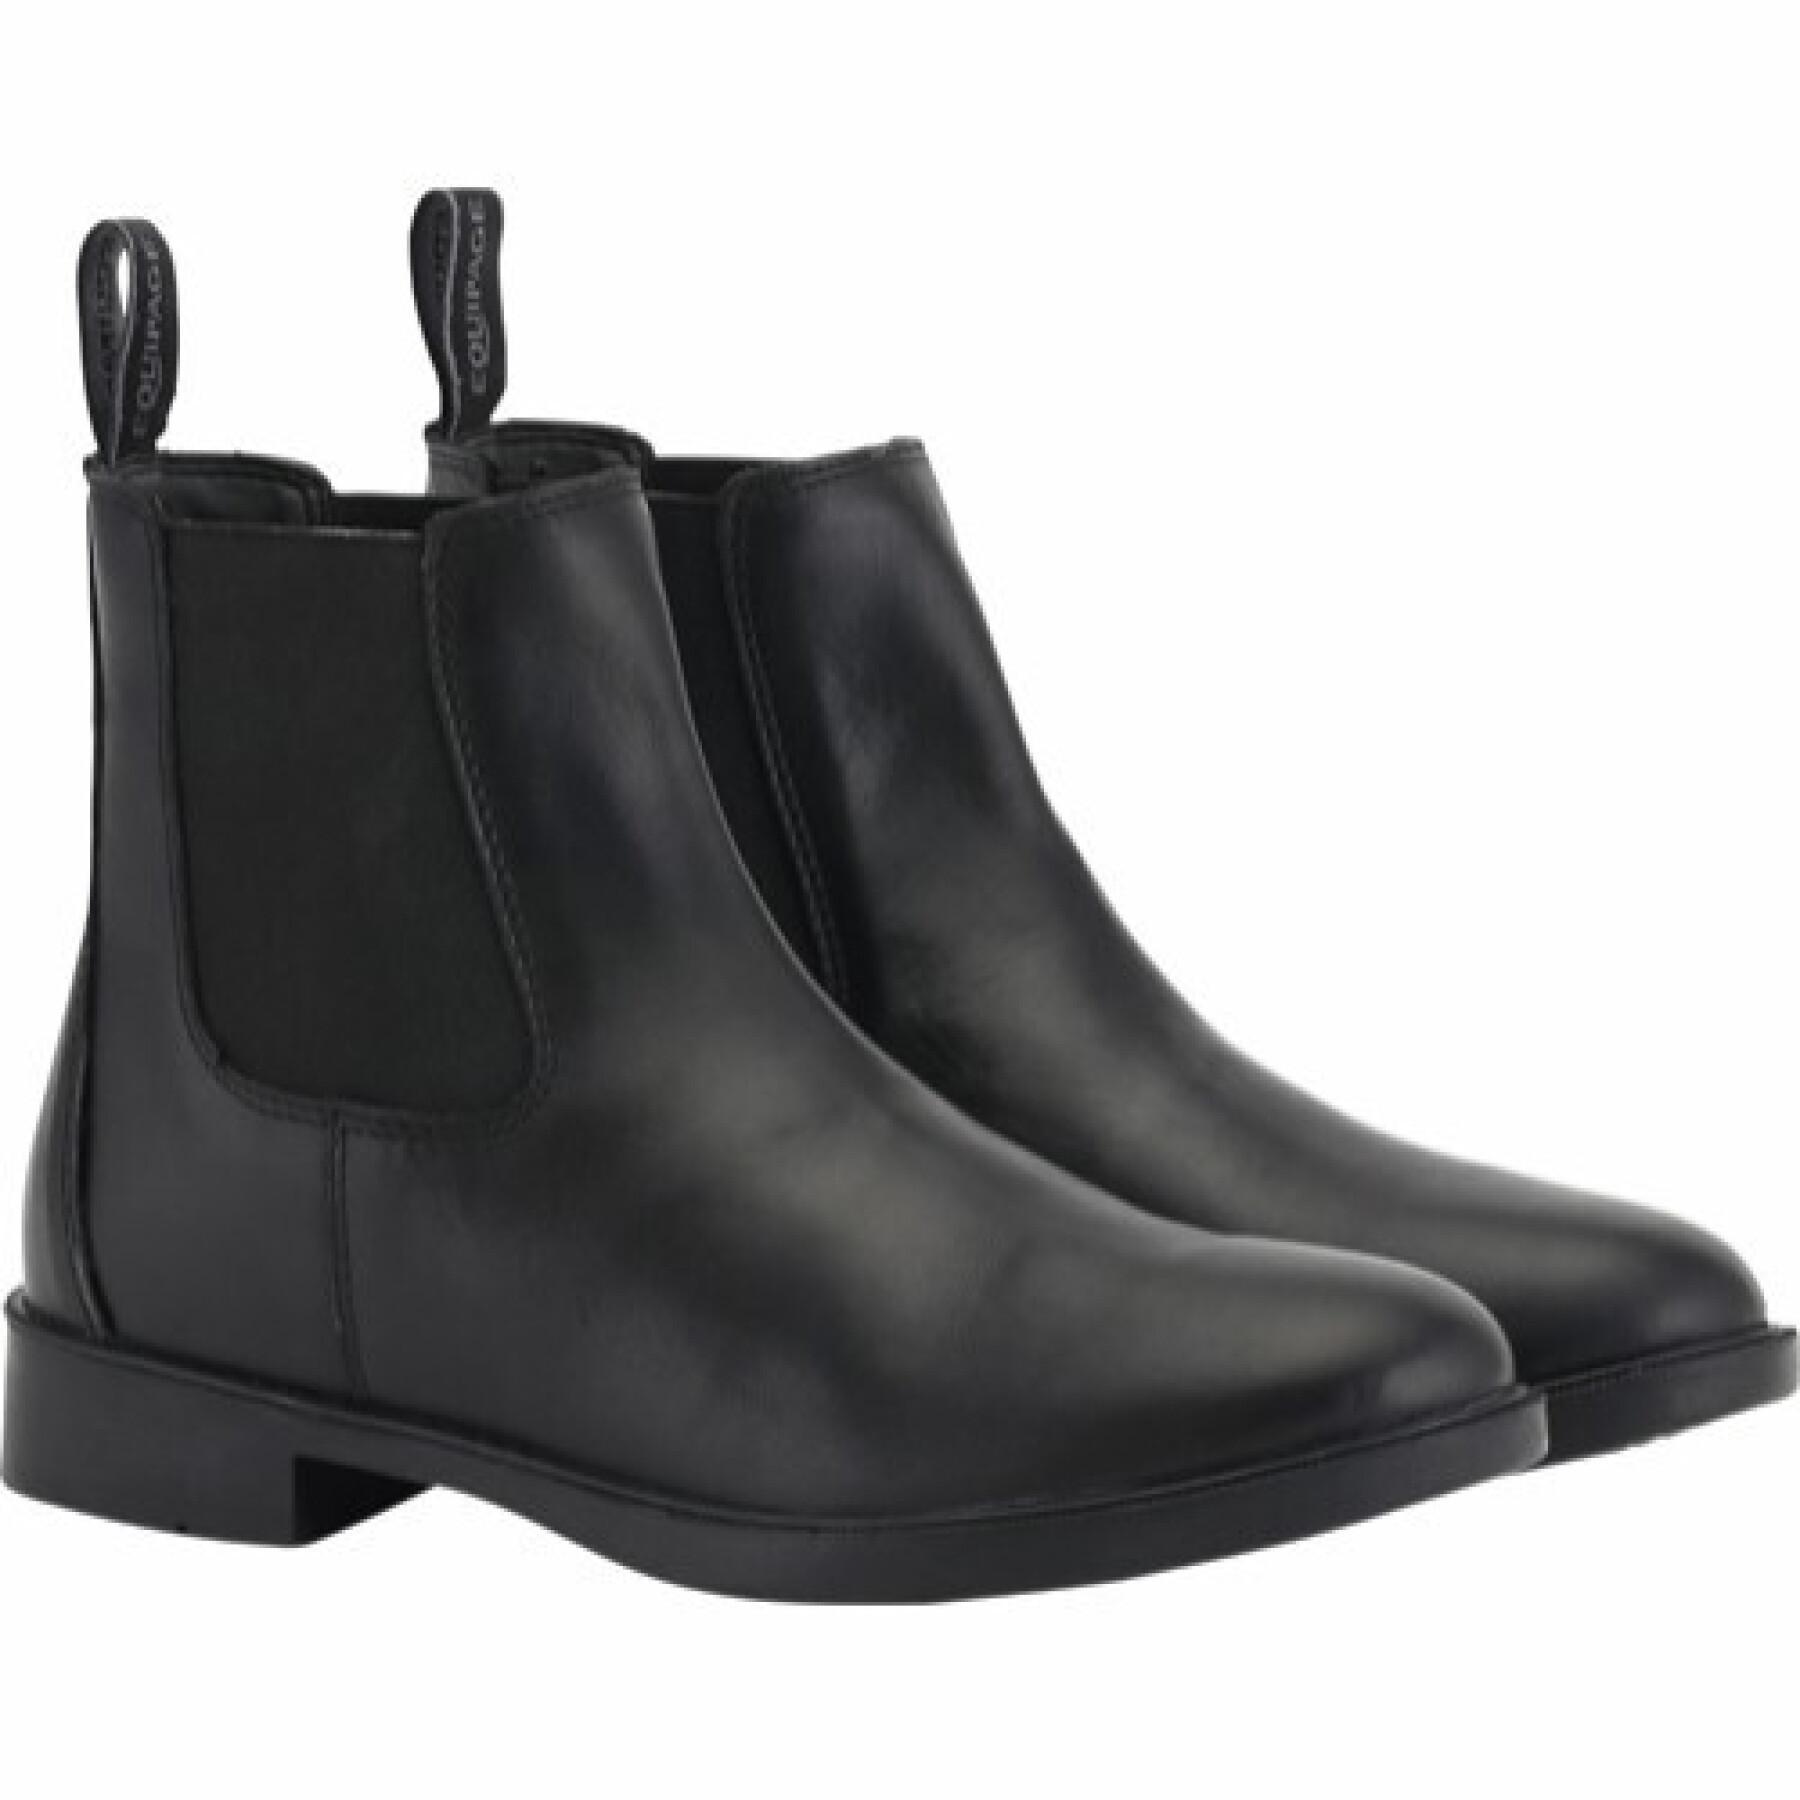 Women's riding boots Equipage Bari